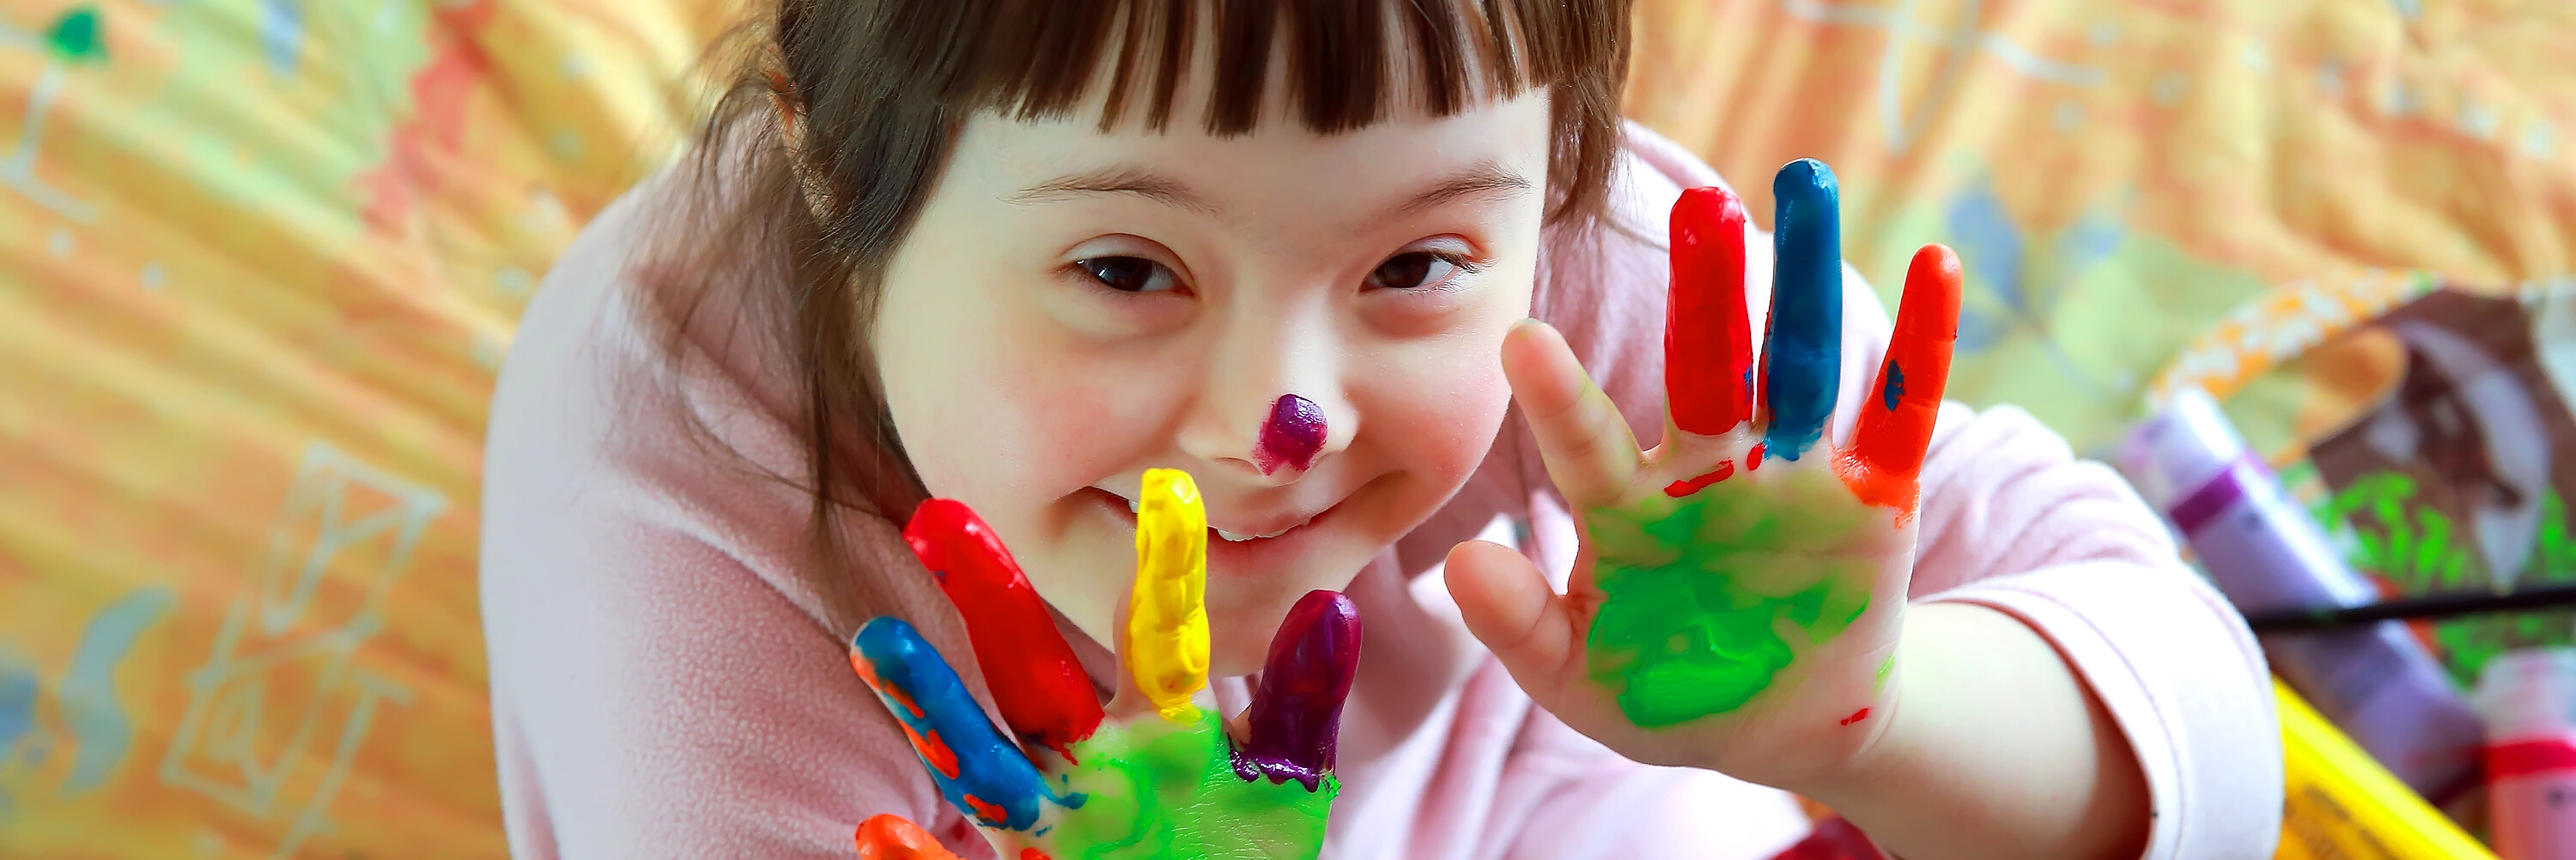 Photo of a girl with paint in her hands during art class